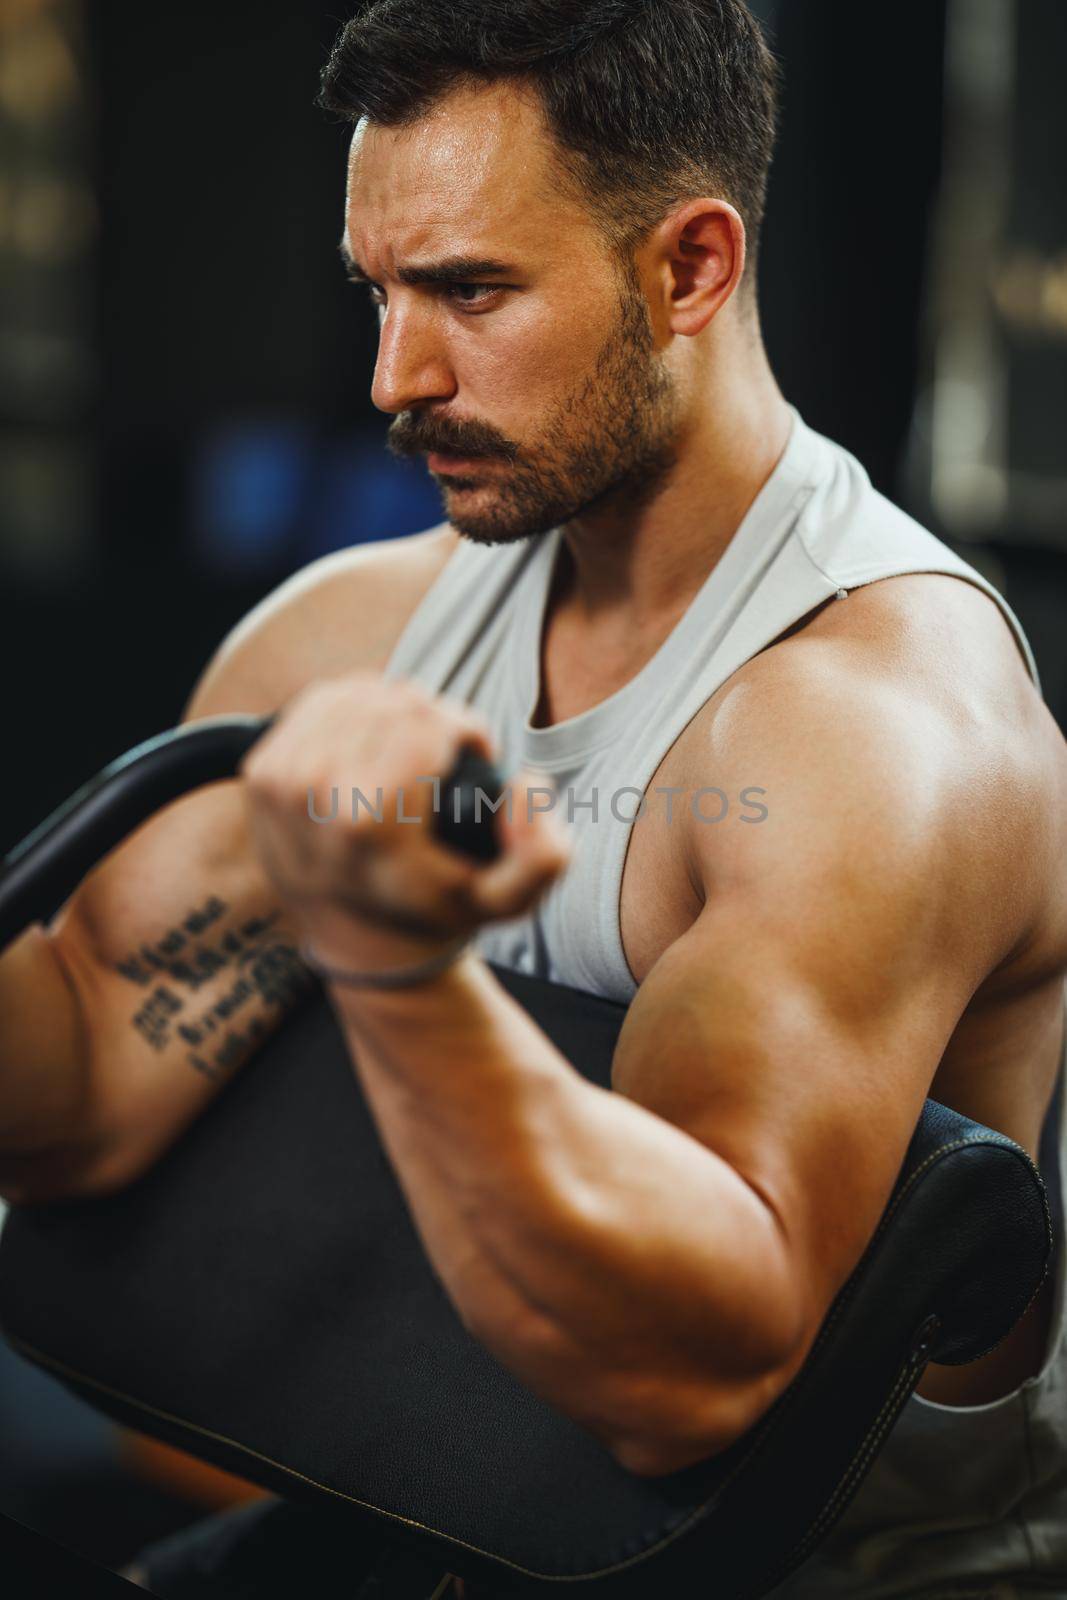 A muscular guy in sportswear working out at the cross training gym. He is pumping up biceps muscule with heavy weight.